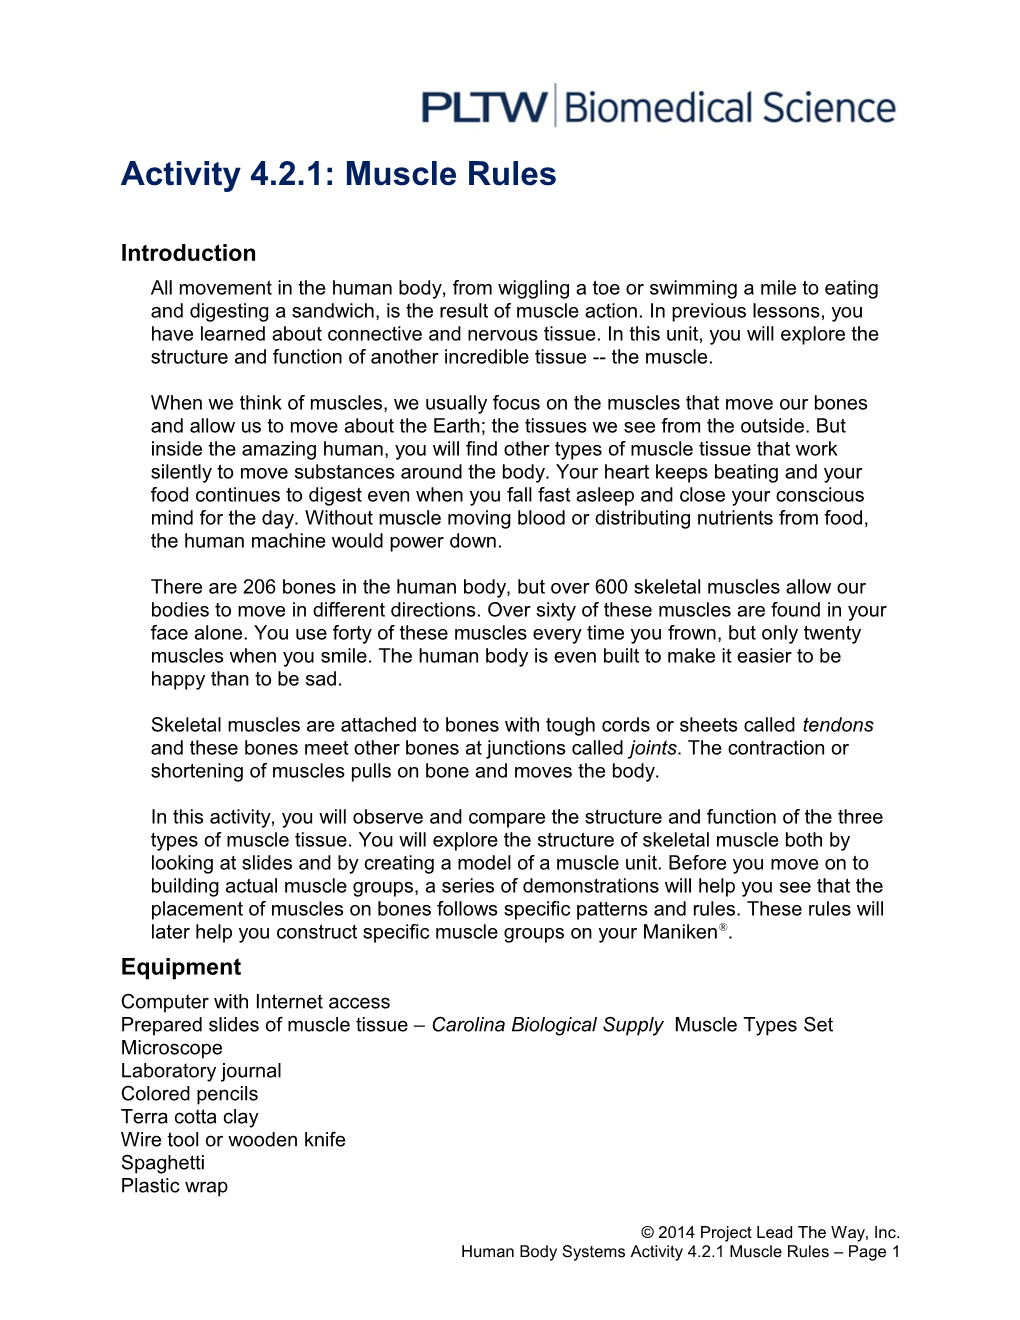 Activity 4.2.1: Muscle Rules